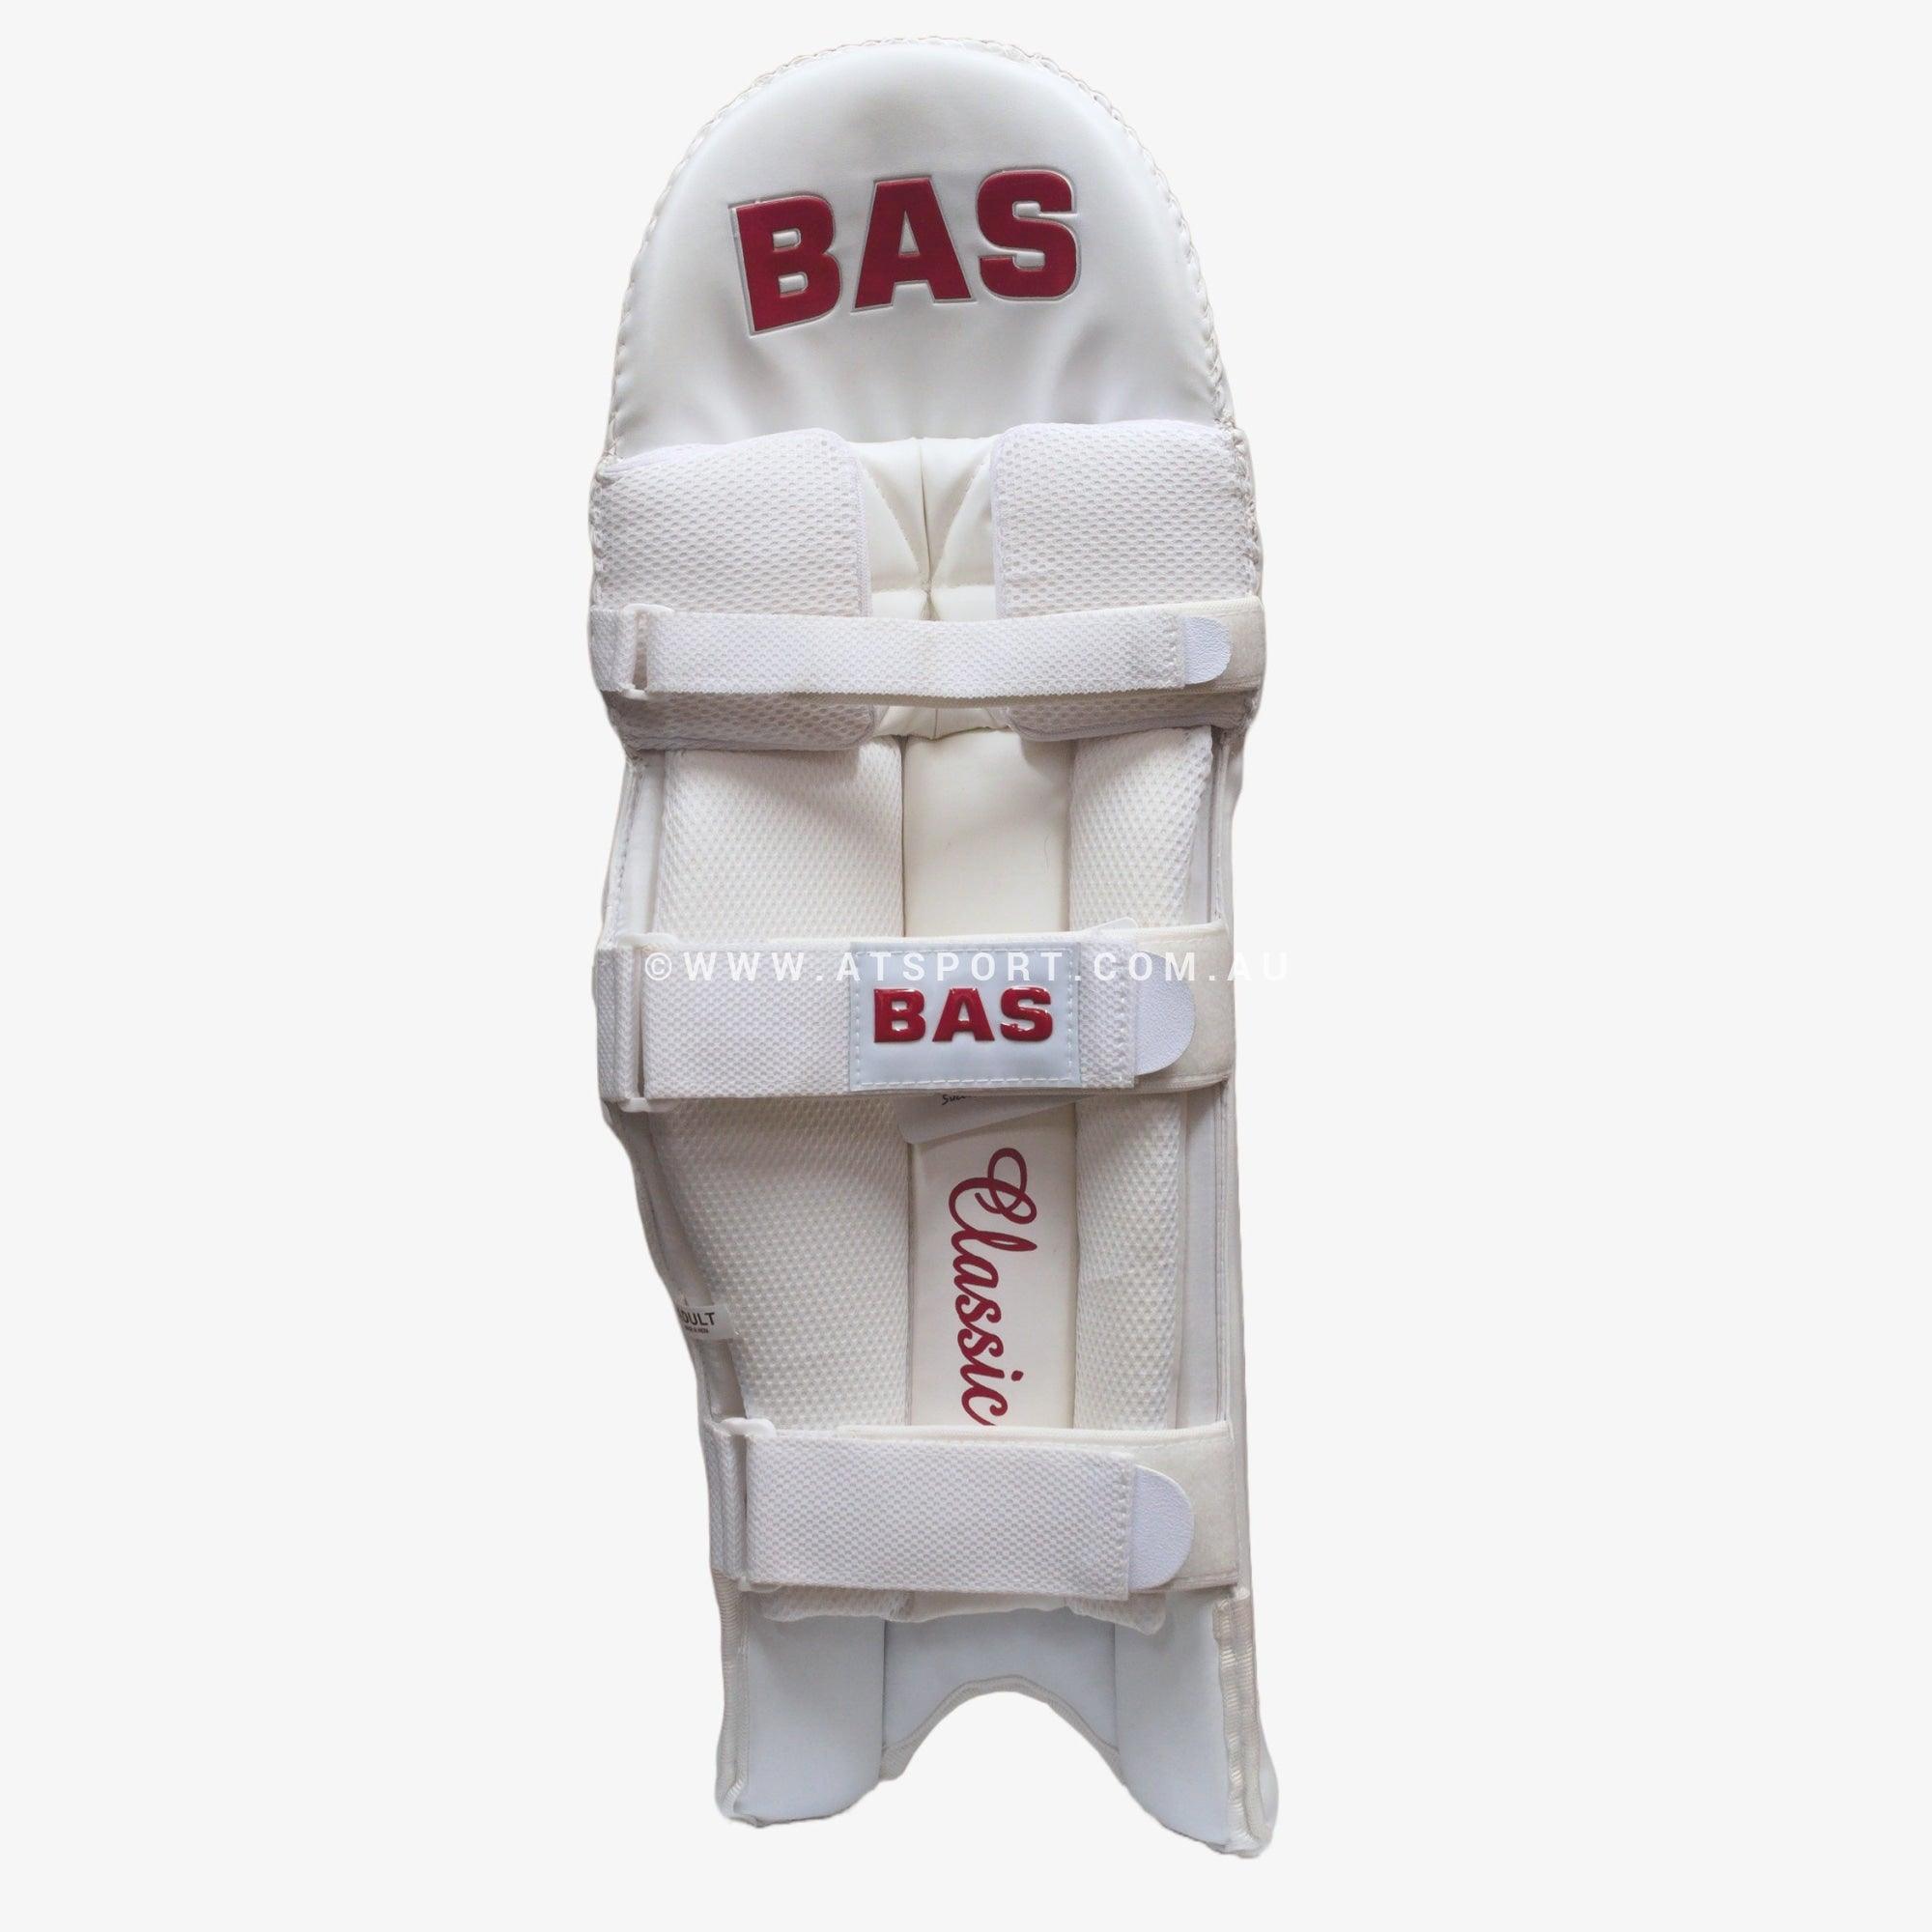 BAS Vintage Classic Cricket Batting Pads - ADULT - AT Sports